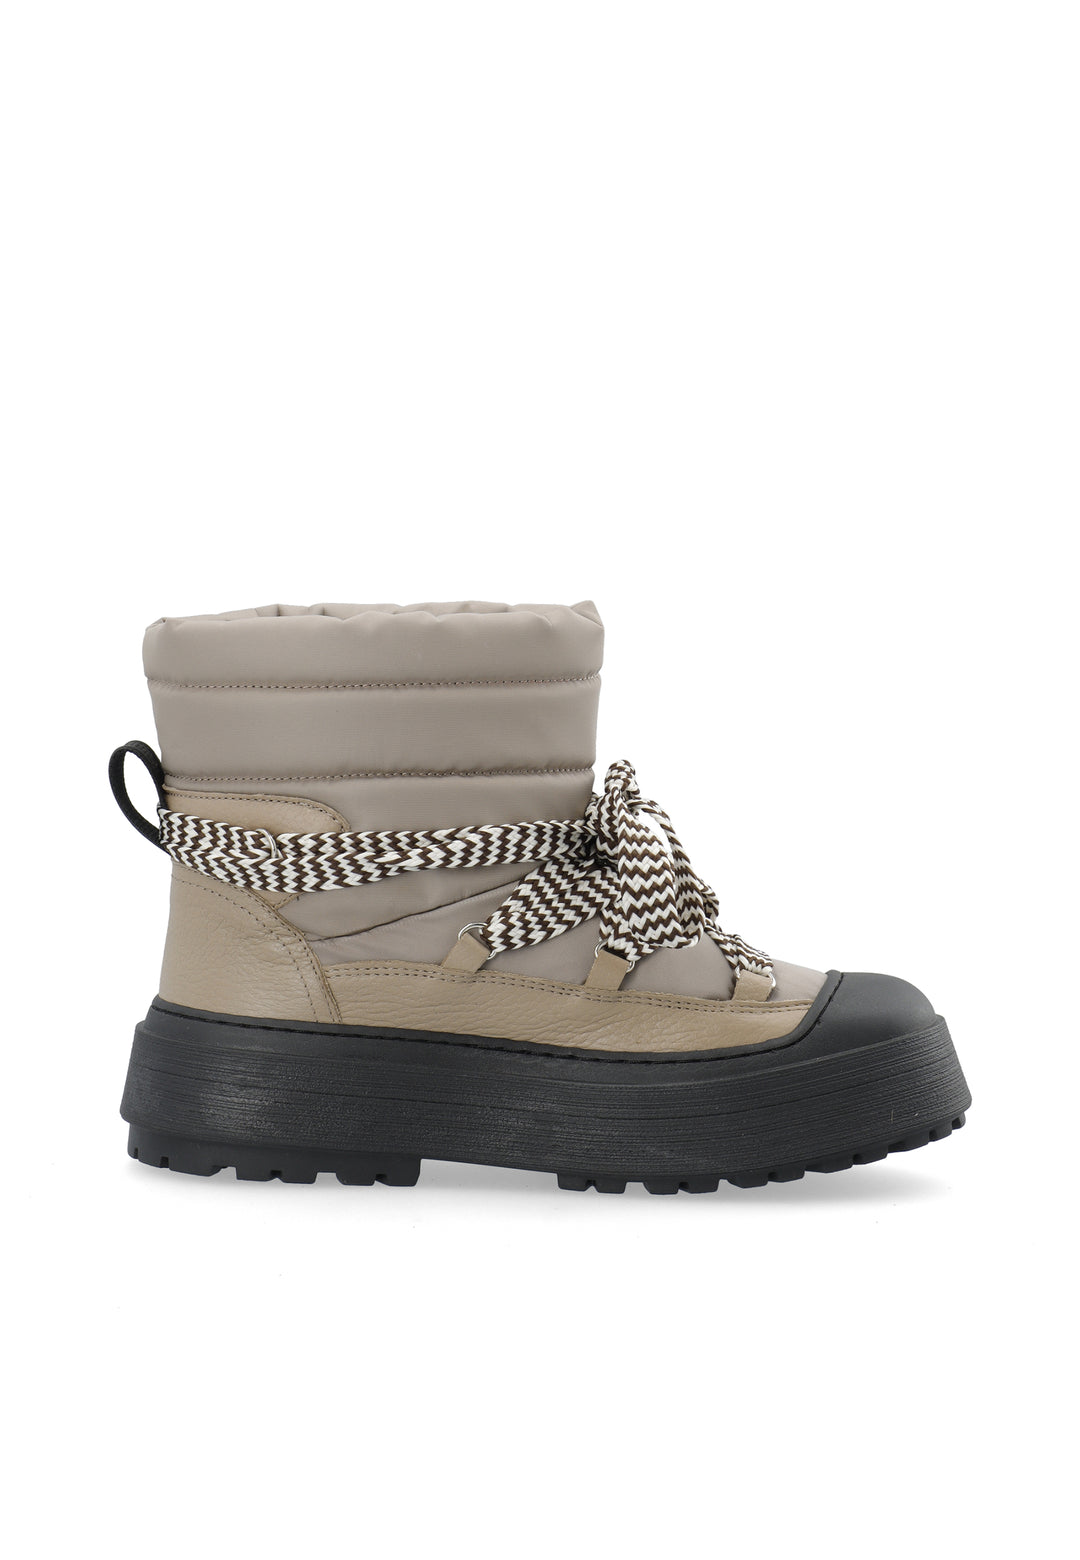 LÄST Snowboot - Leather/Textile - Taupe, Warm Lining Ankle Boots Taupe